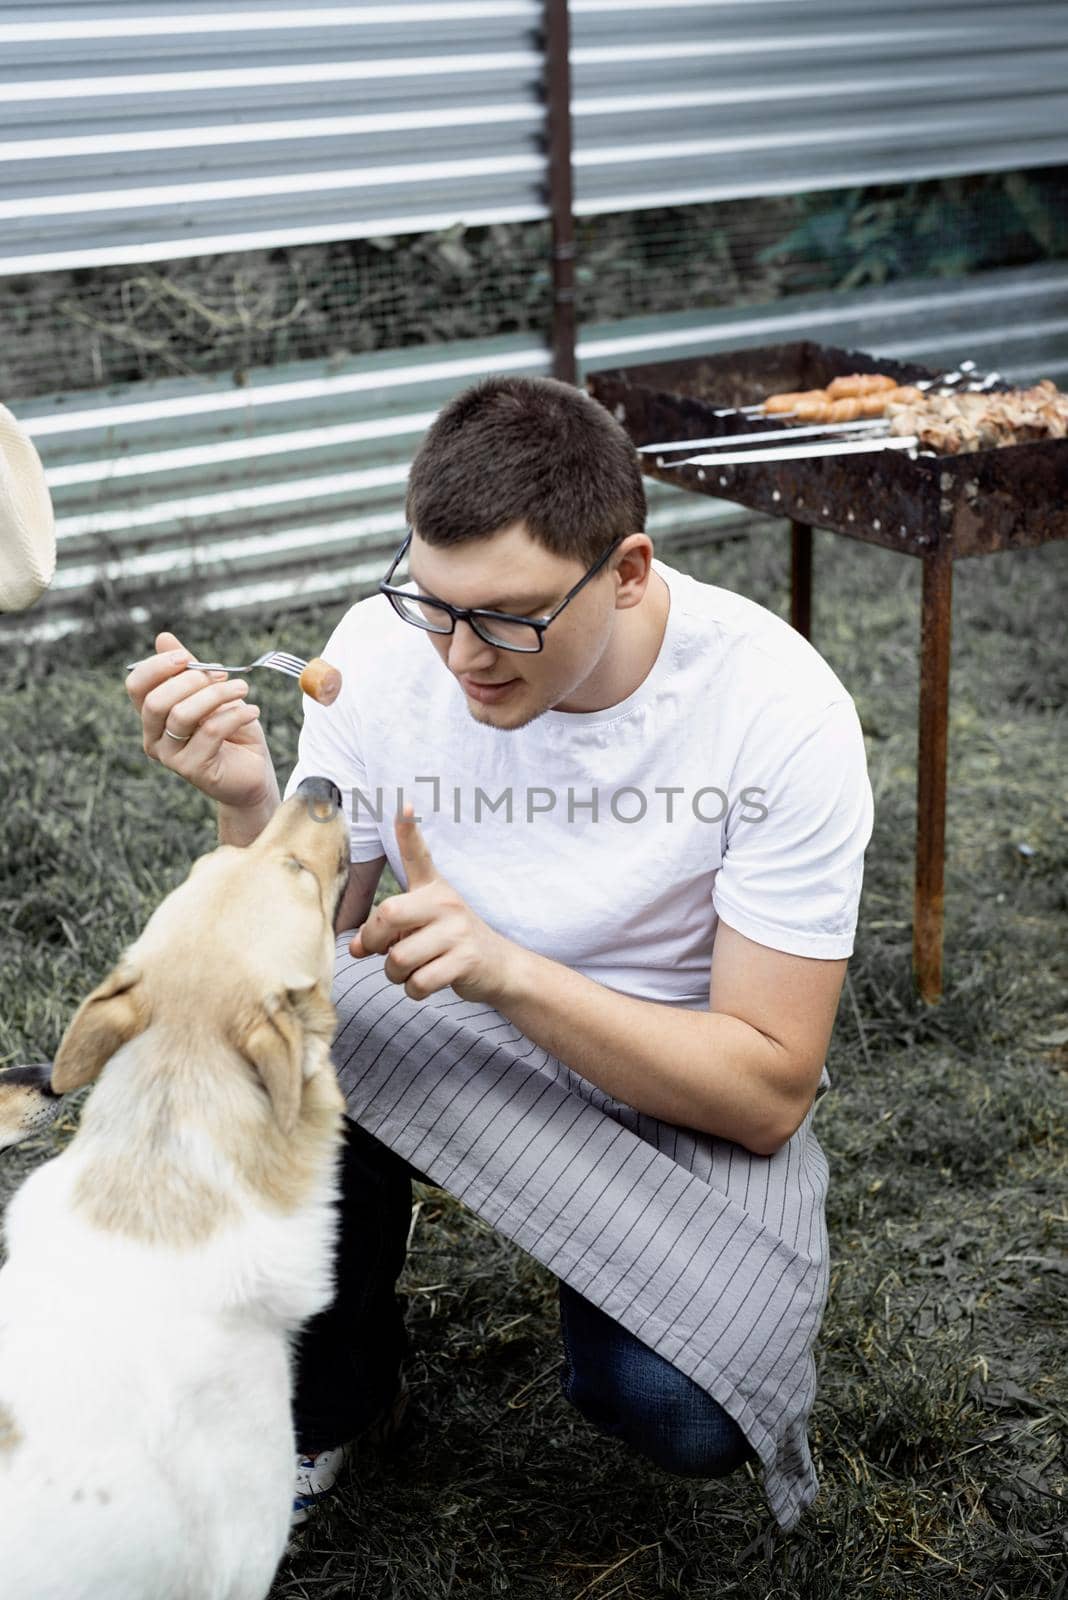 Caucasian man gives a snack to his dog, walking outdoors in the backyard